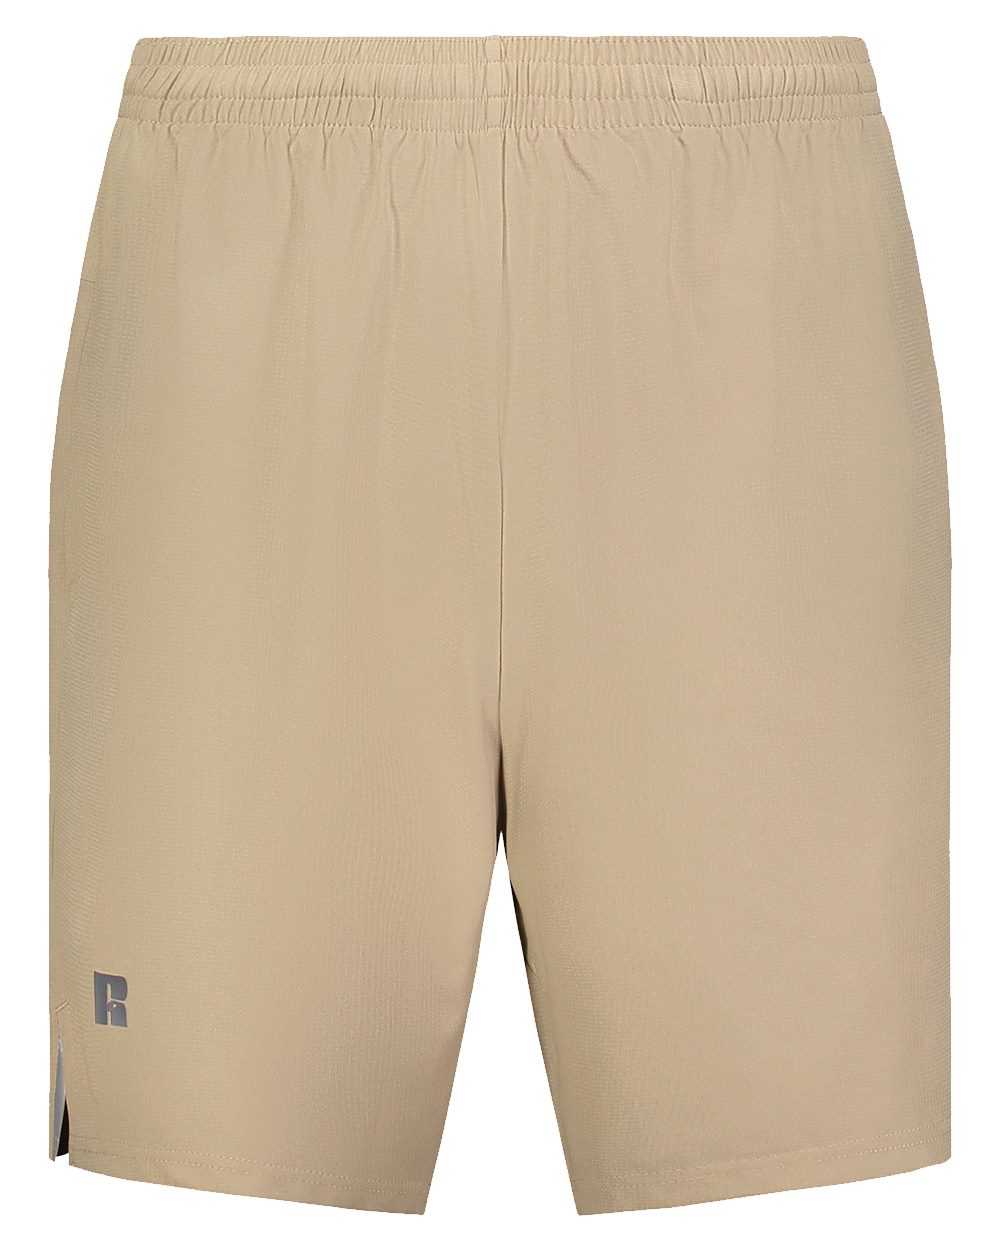 Russell Athletic R20SWM - Legend Woven Shorts